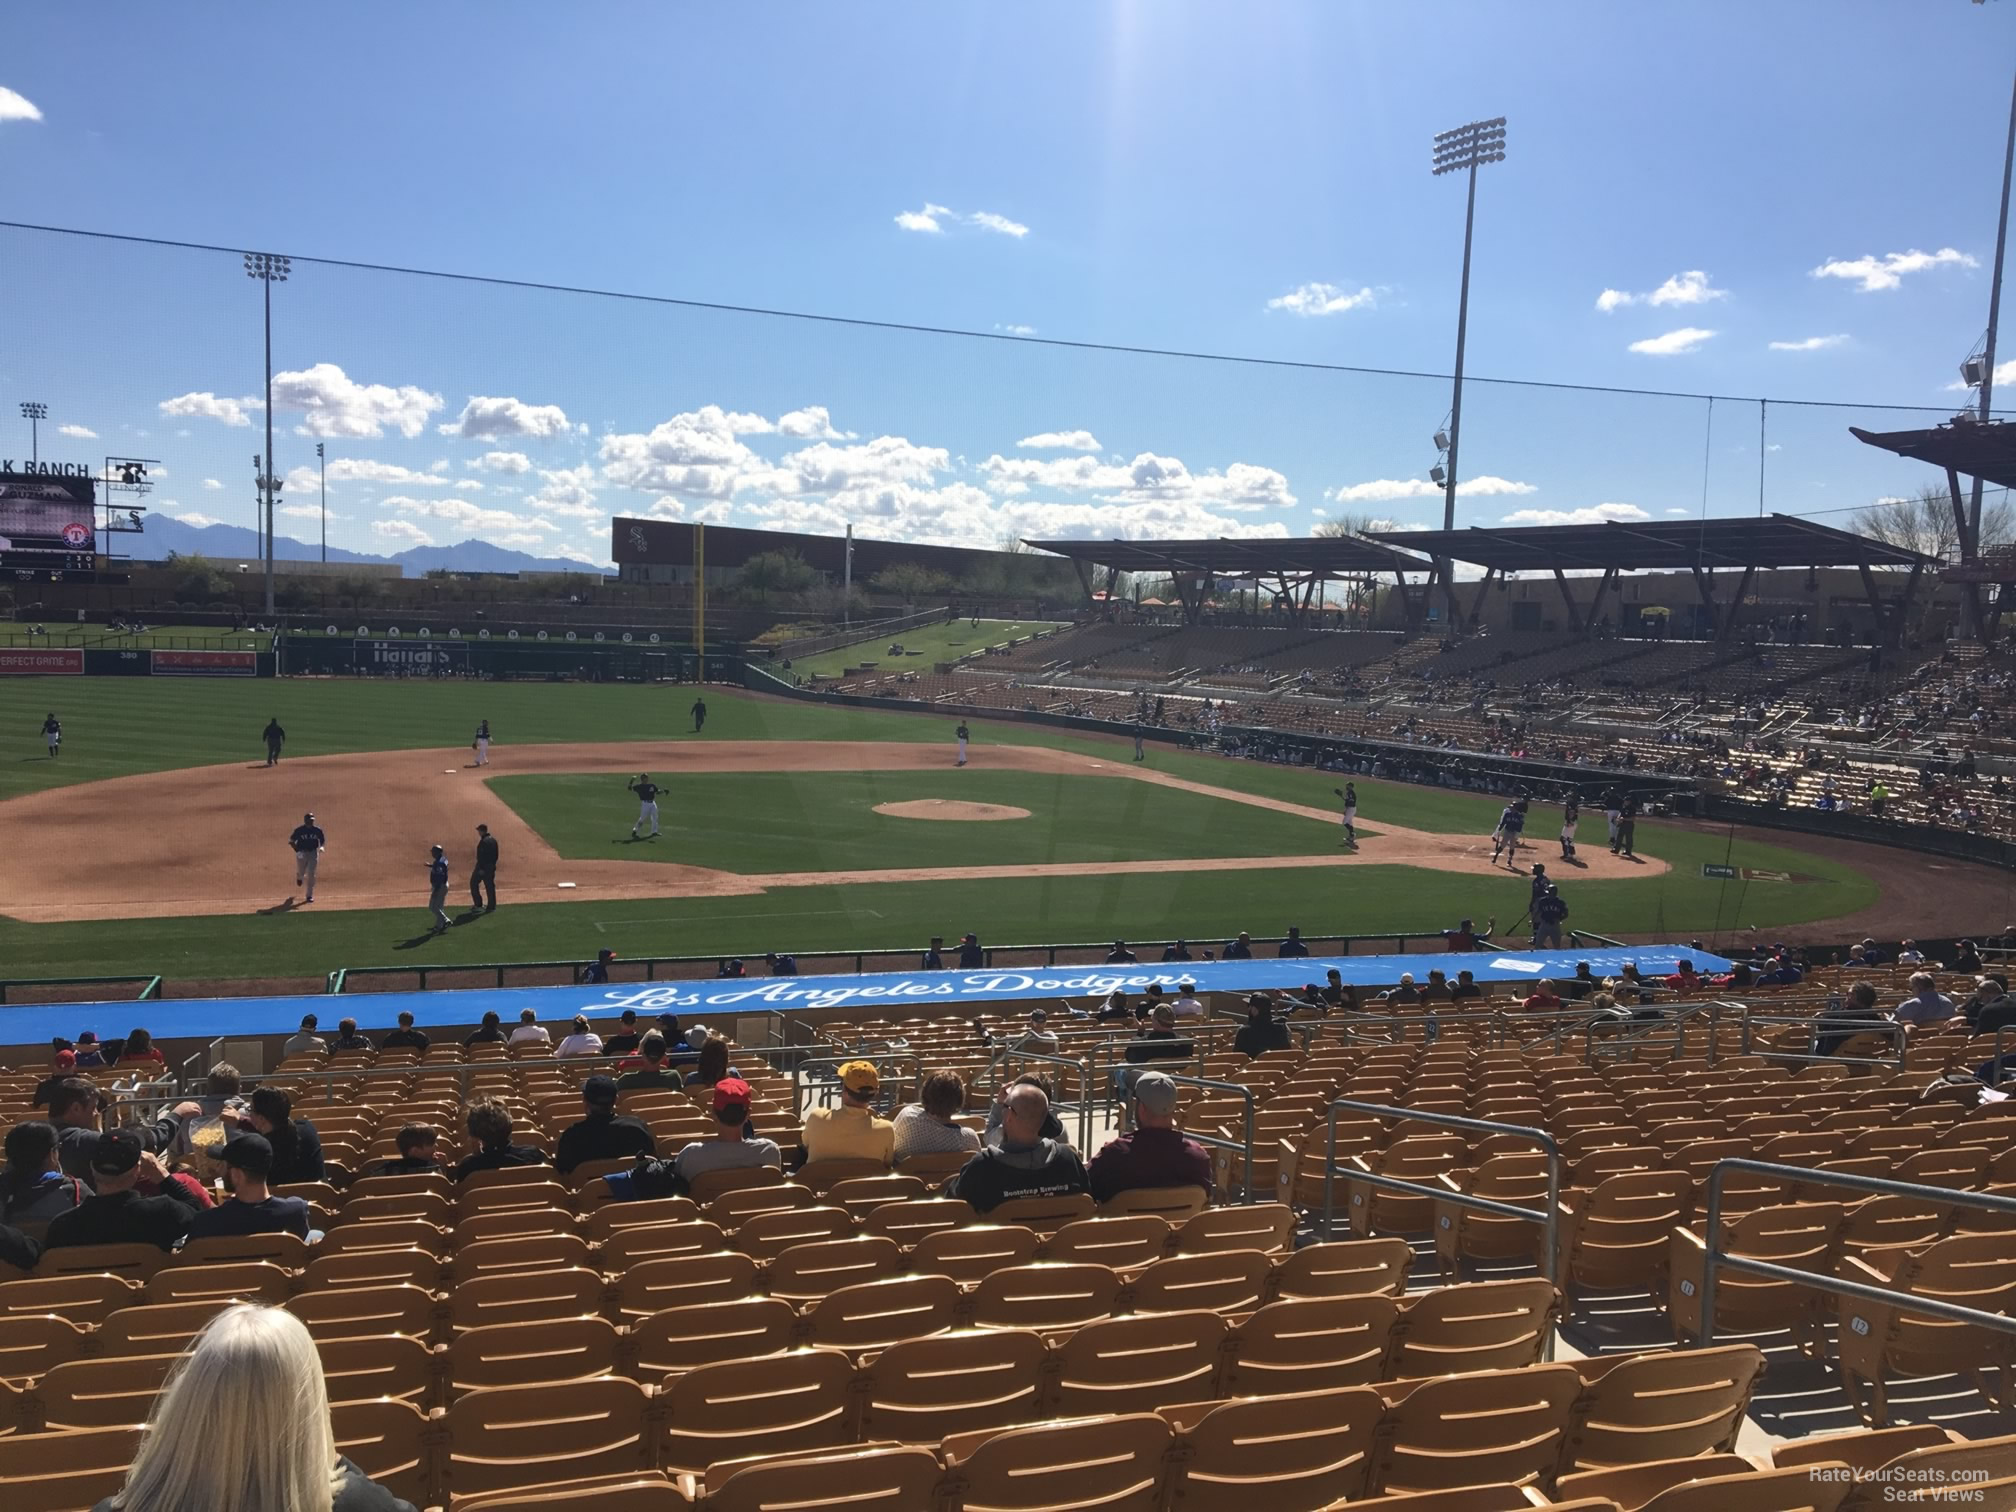 section 123, row 18 seat view  - camelback ranch